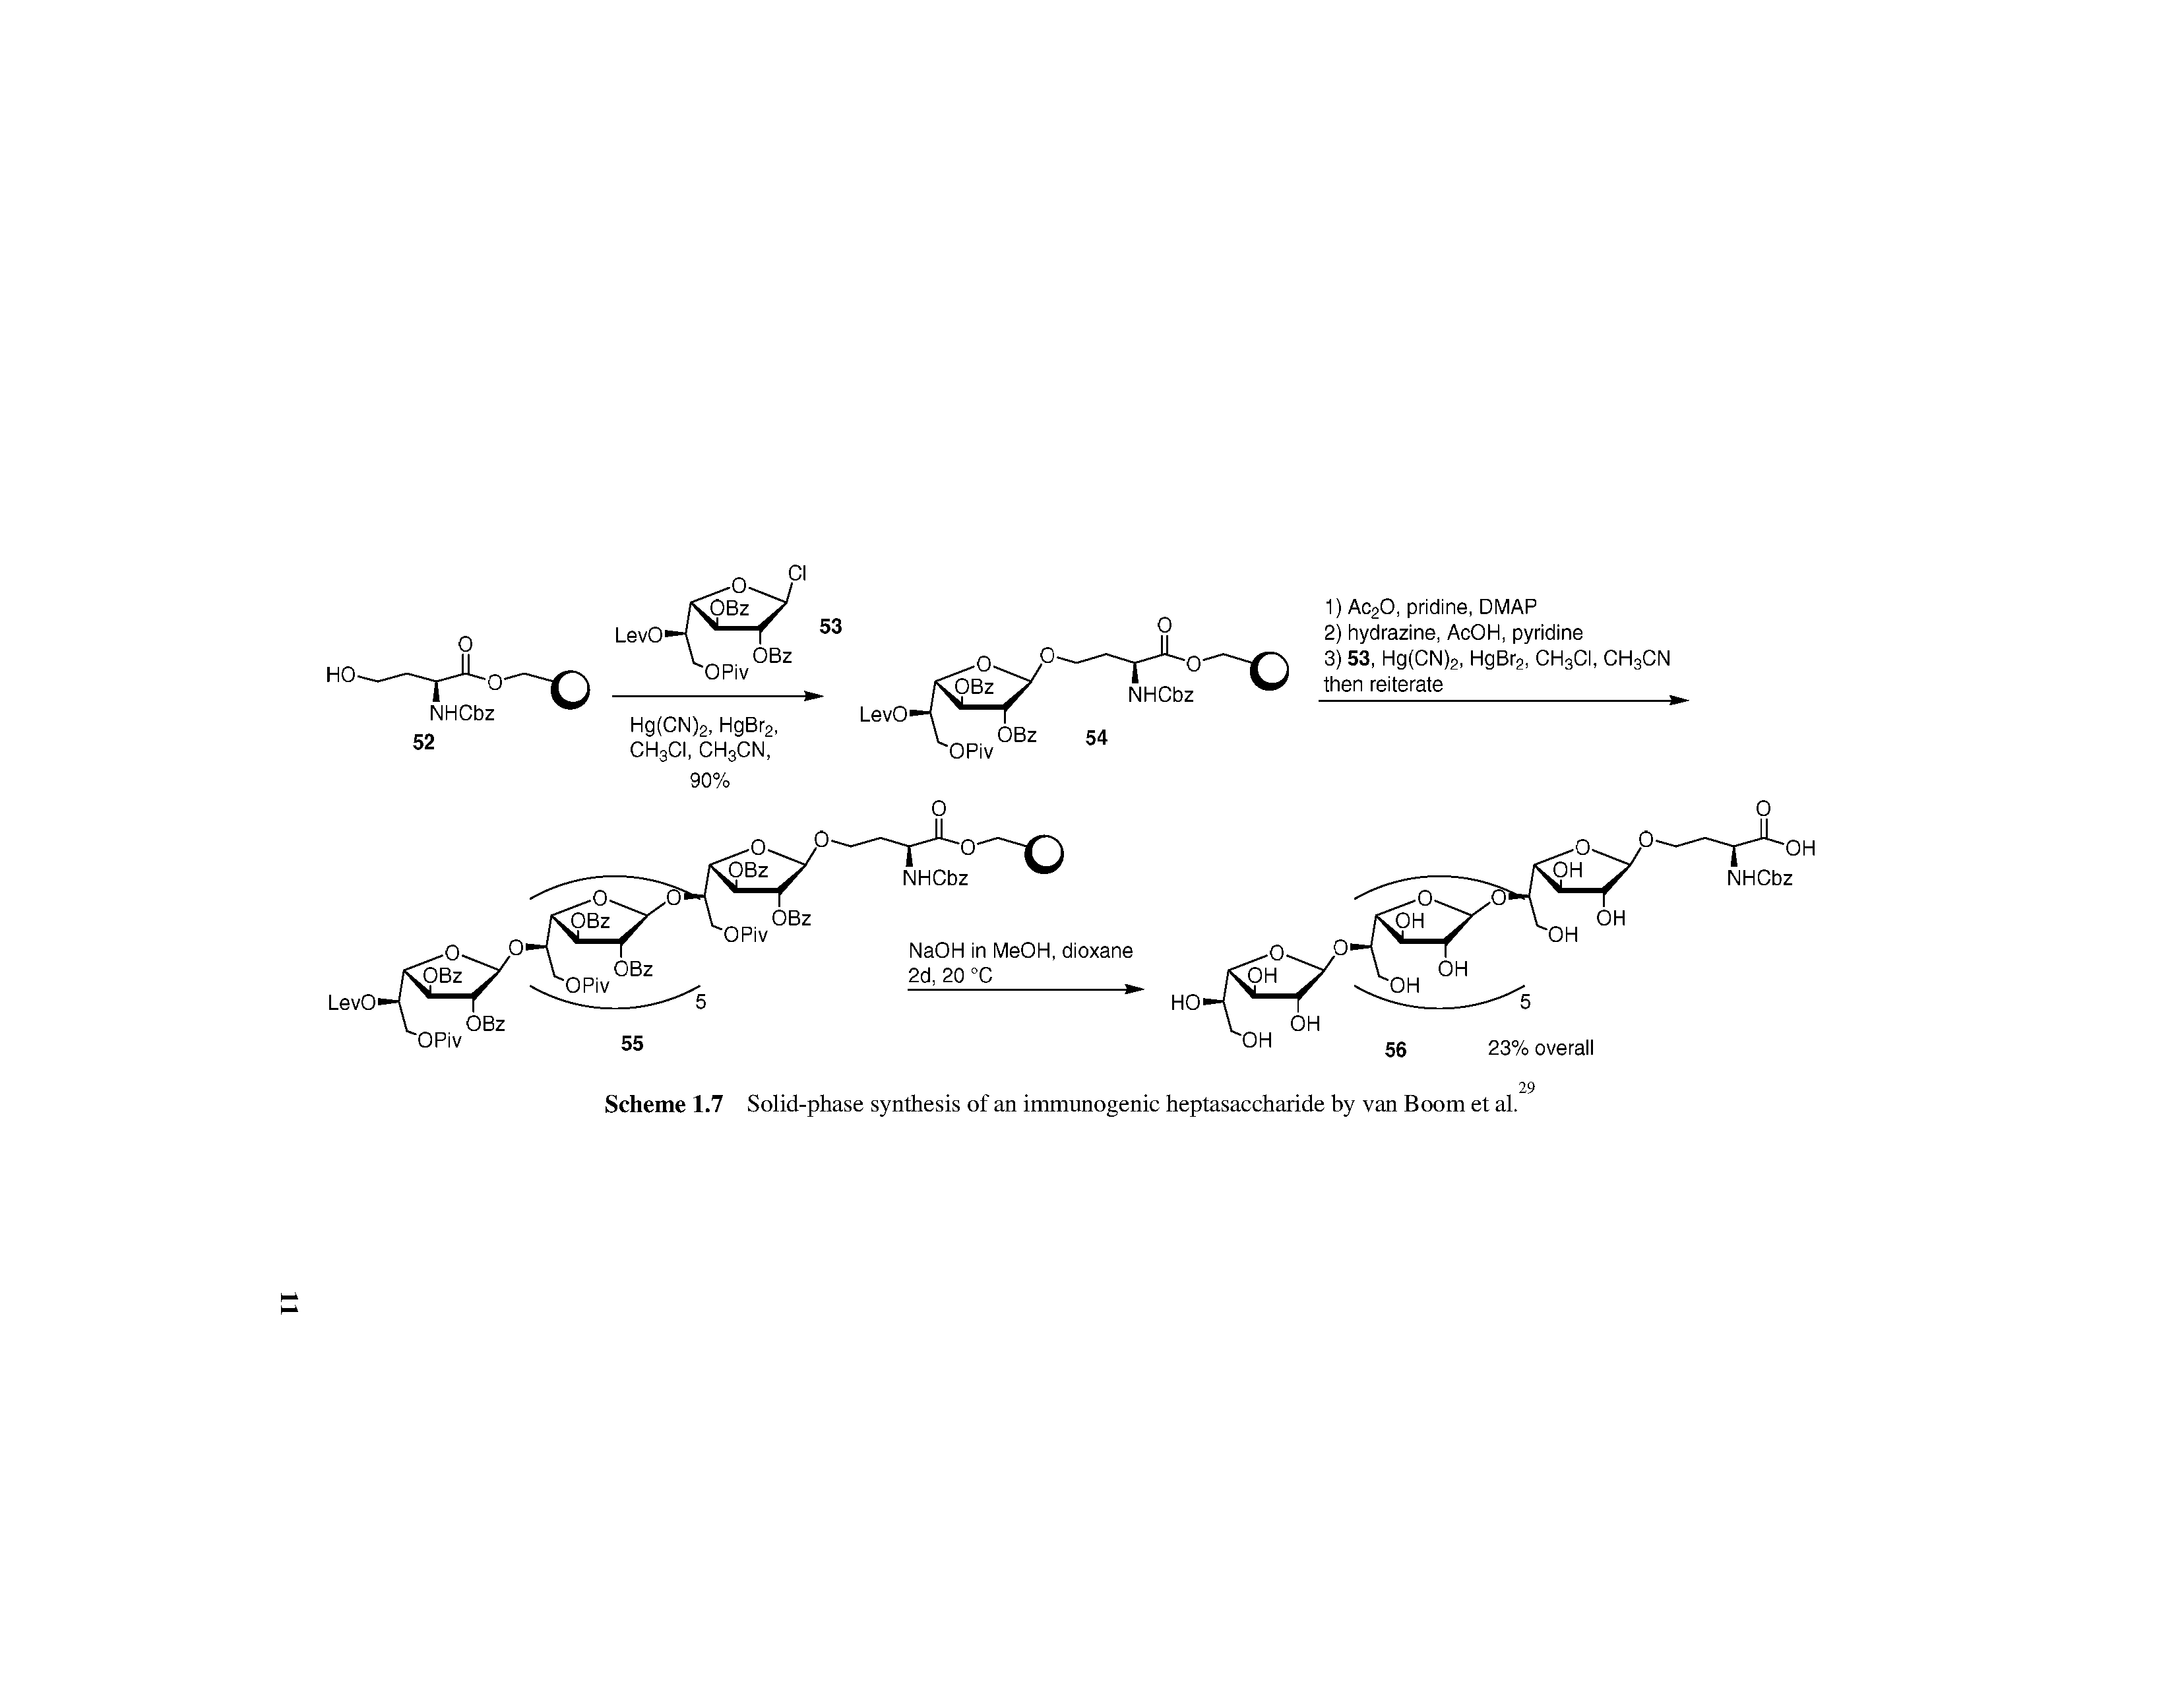 Scheme 1.7 Solid-phase synthesis of an immunogenic heptasaccharide by van Boom et al.